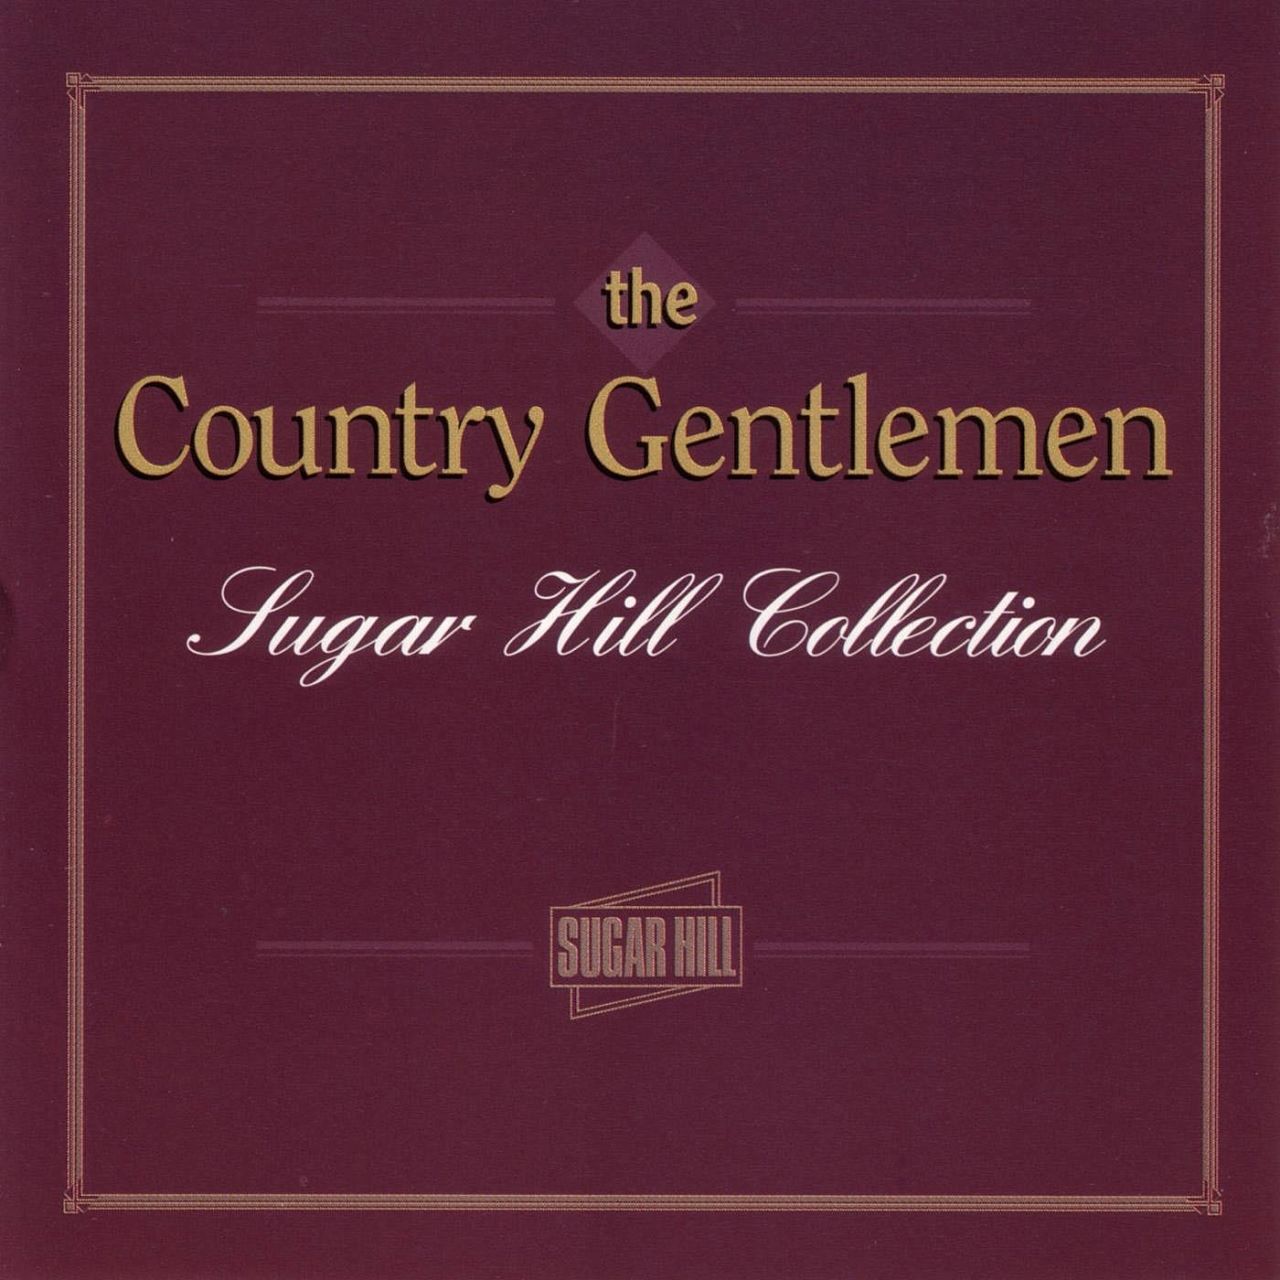 Country Gentlemen - Sugar Hill Collection cover album